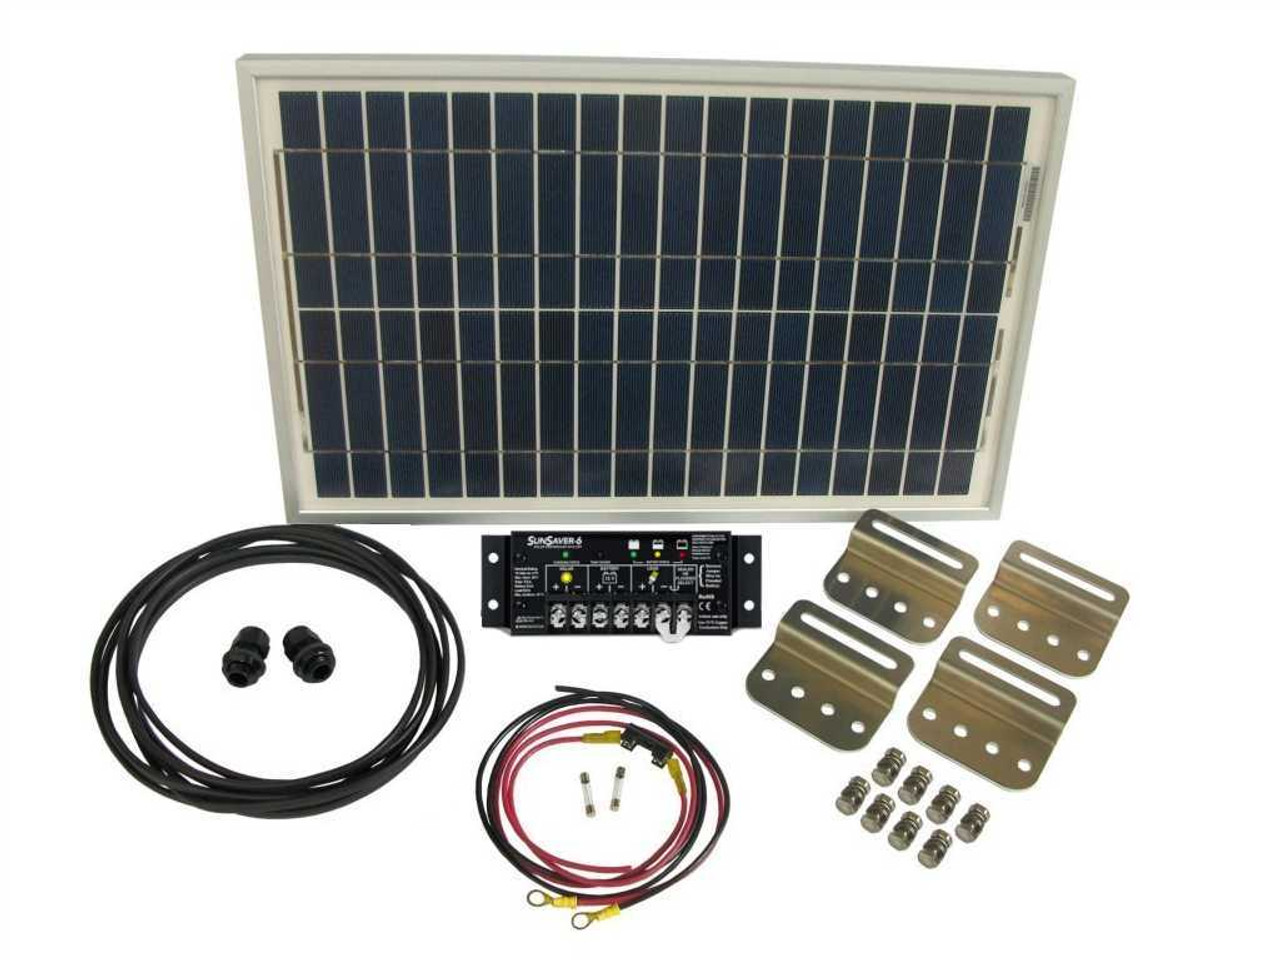 100 Watt Solar Panel Kit W Charge Controller Battery Wiring And Mounting Brackets